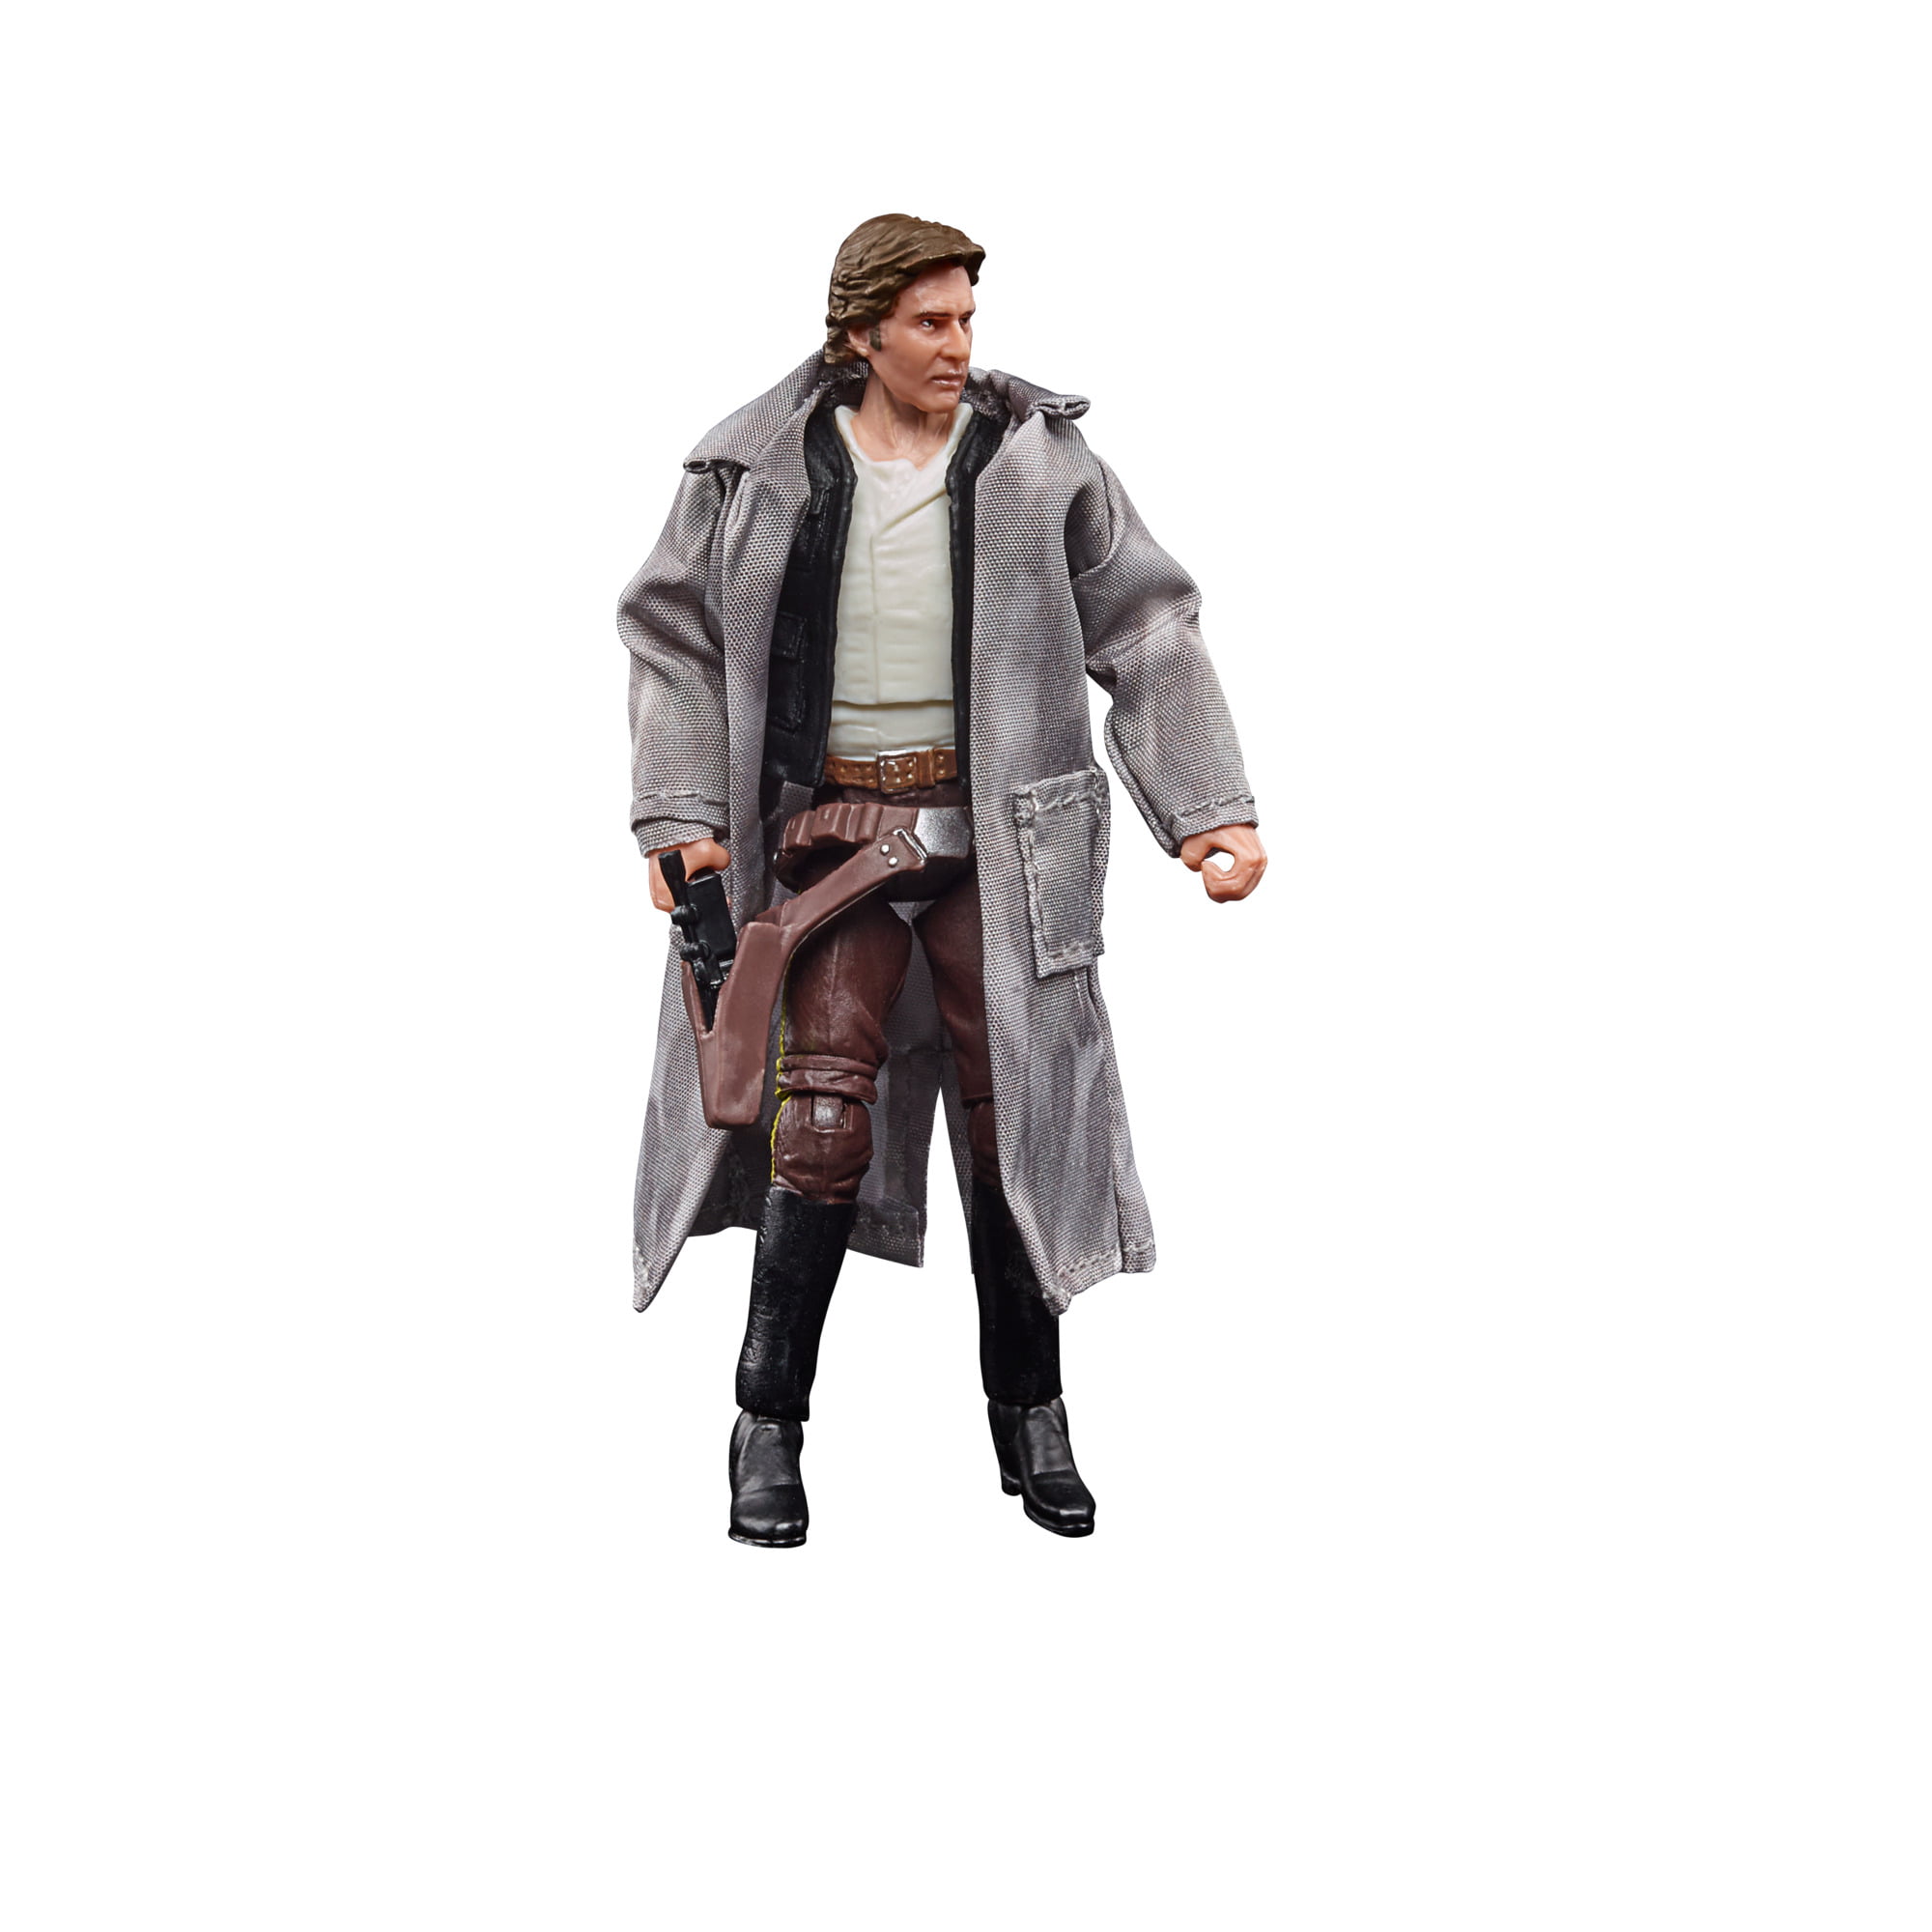 Kenner STAR WARS Collection Han Solo Action Figure for sale online 